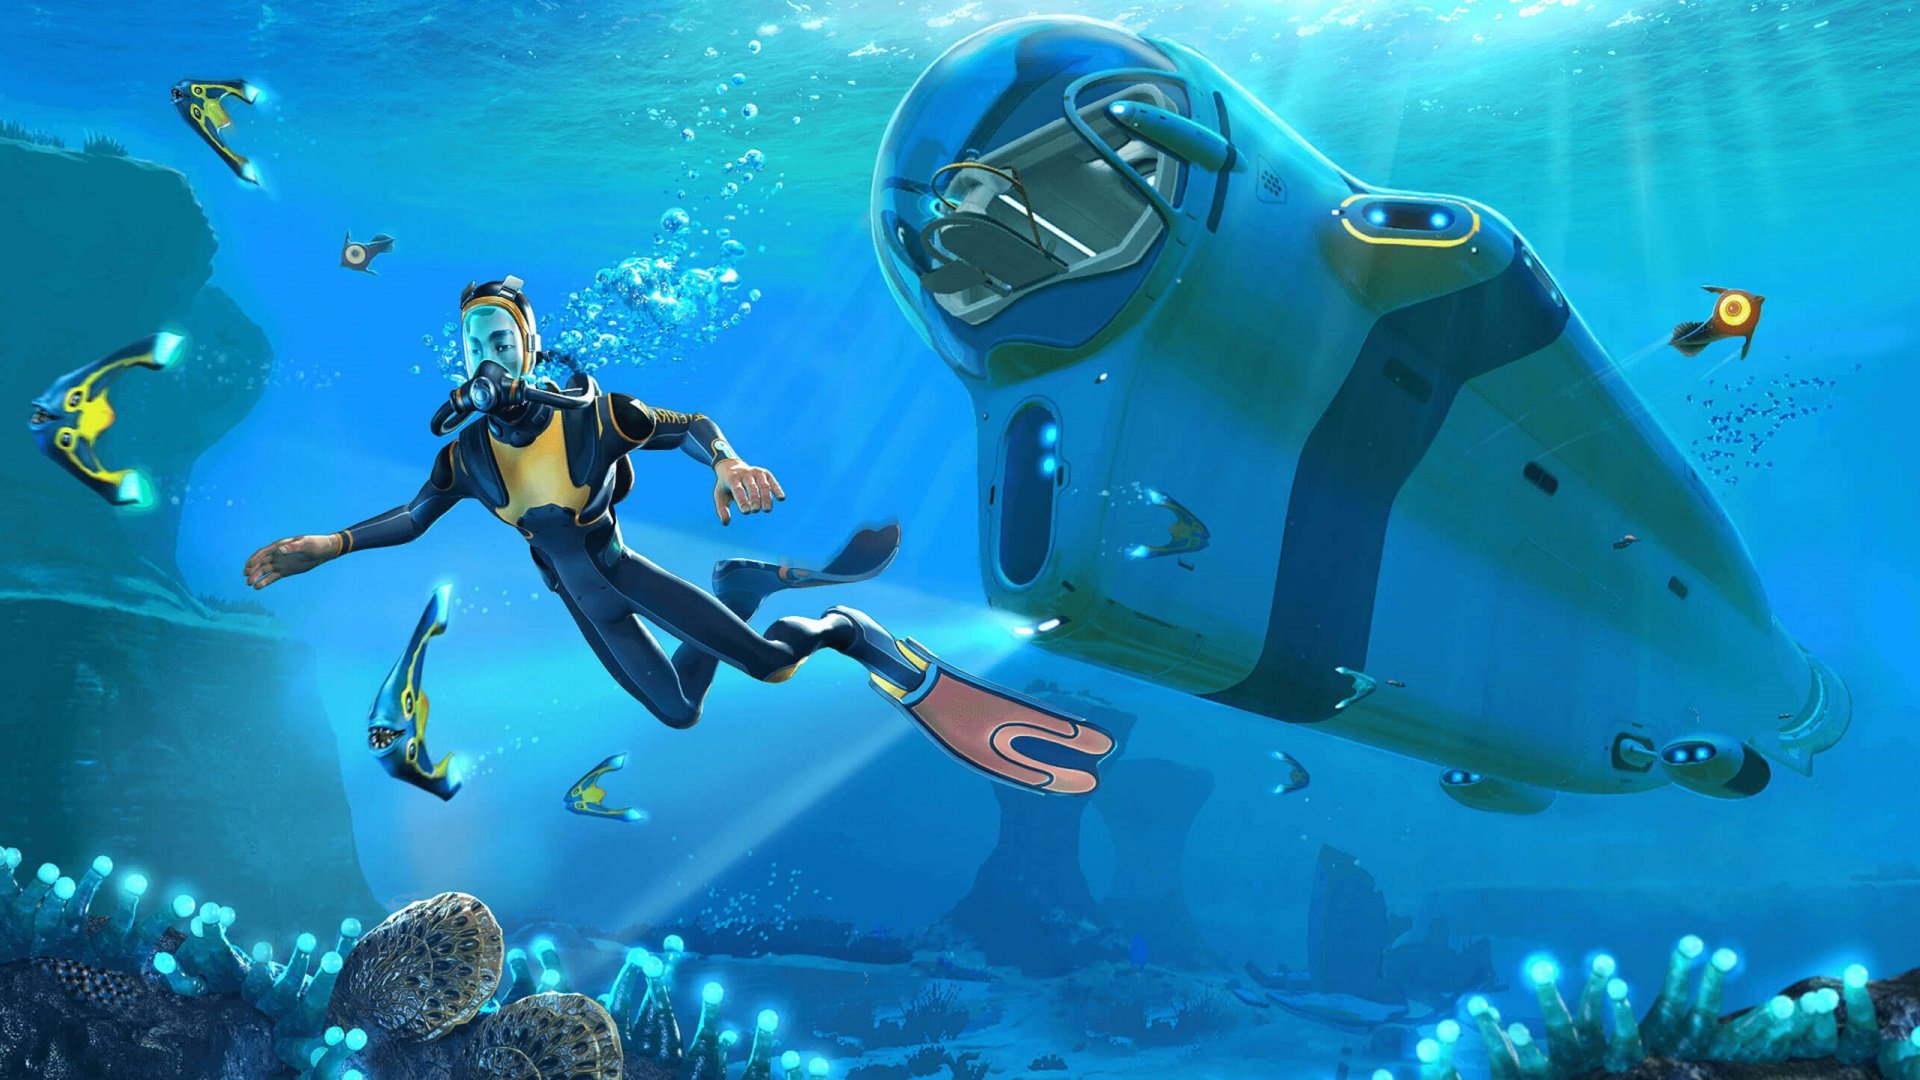 View of the Subnautica game